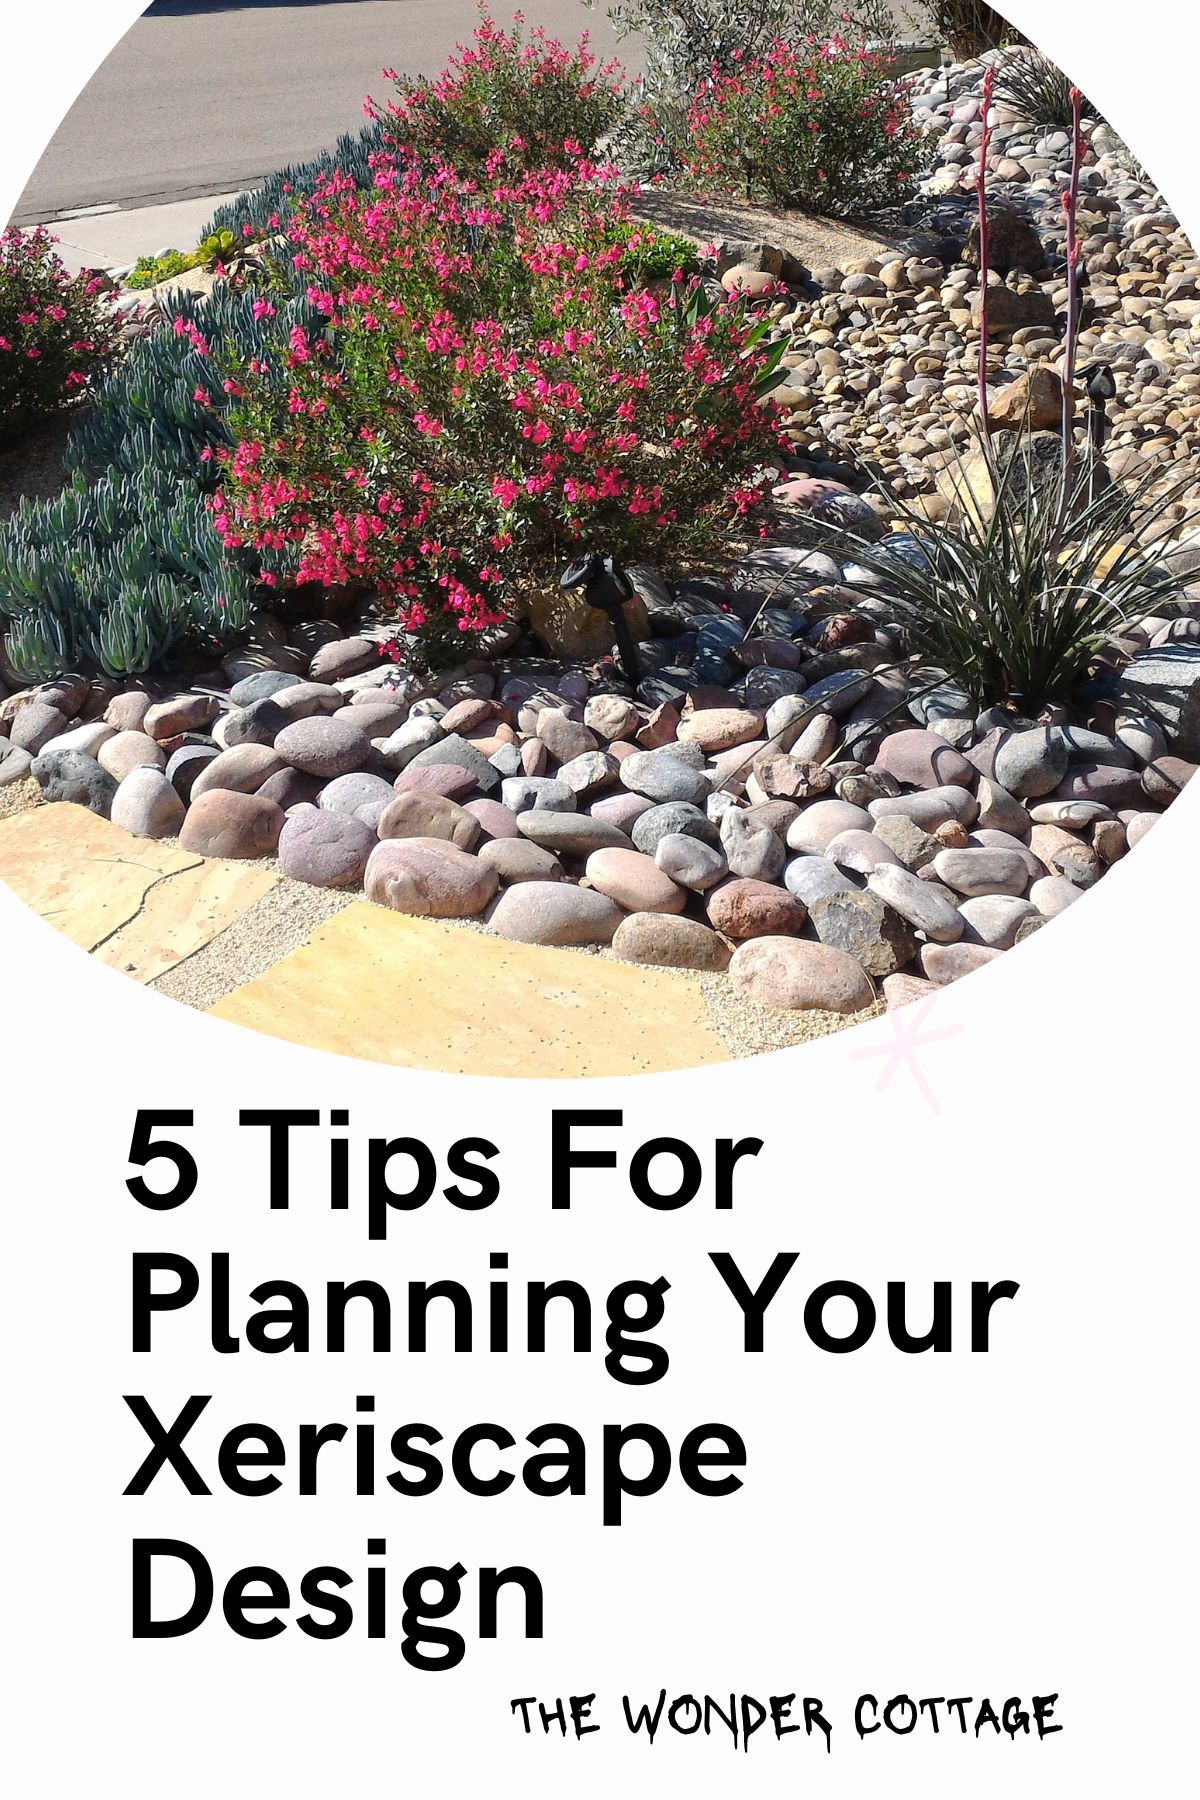 5 tips for planning your xeriscape design